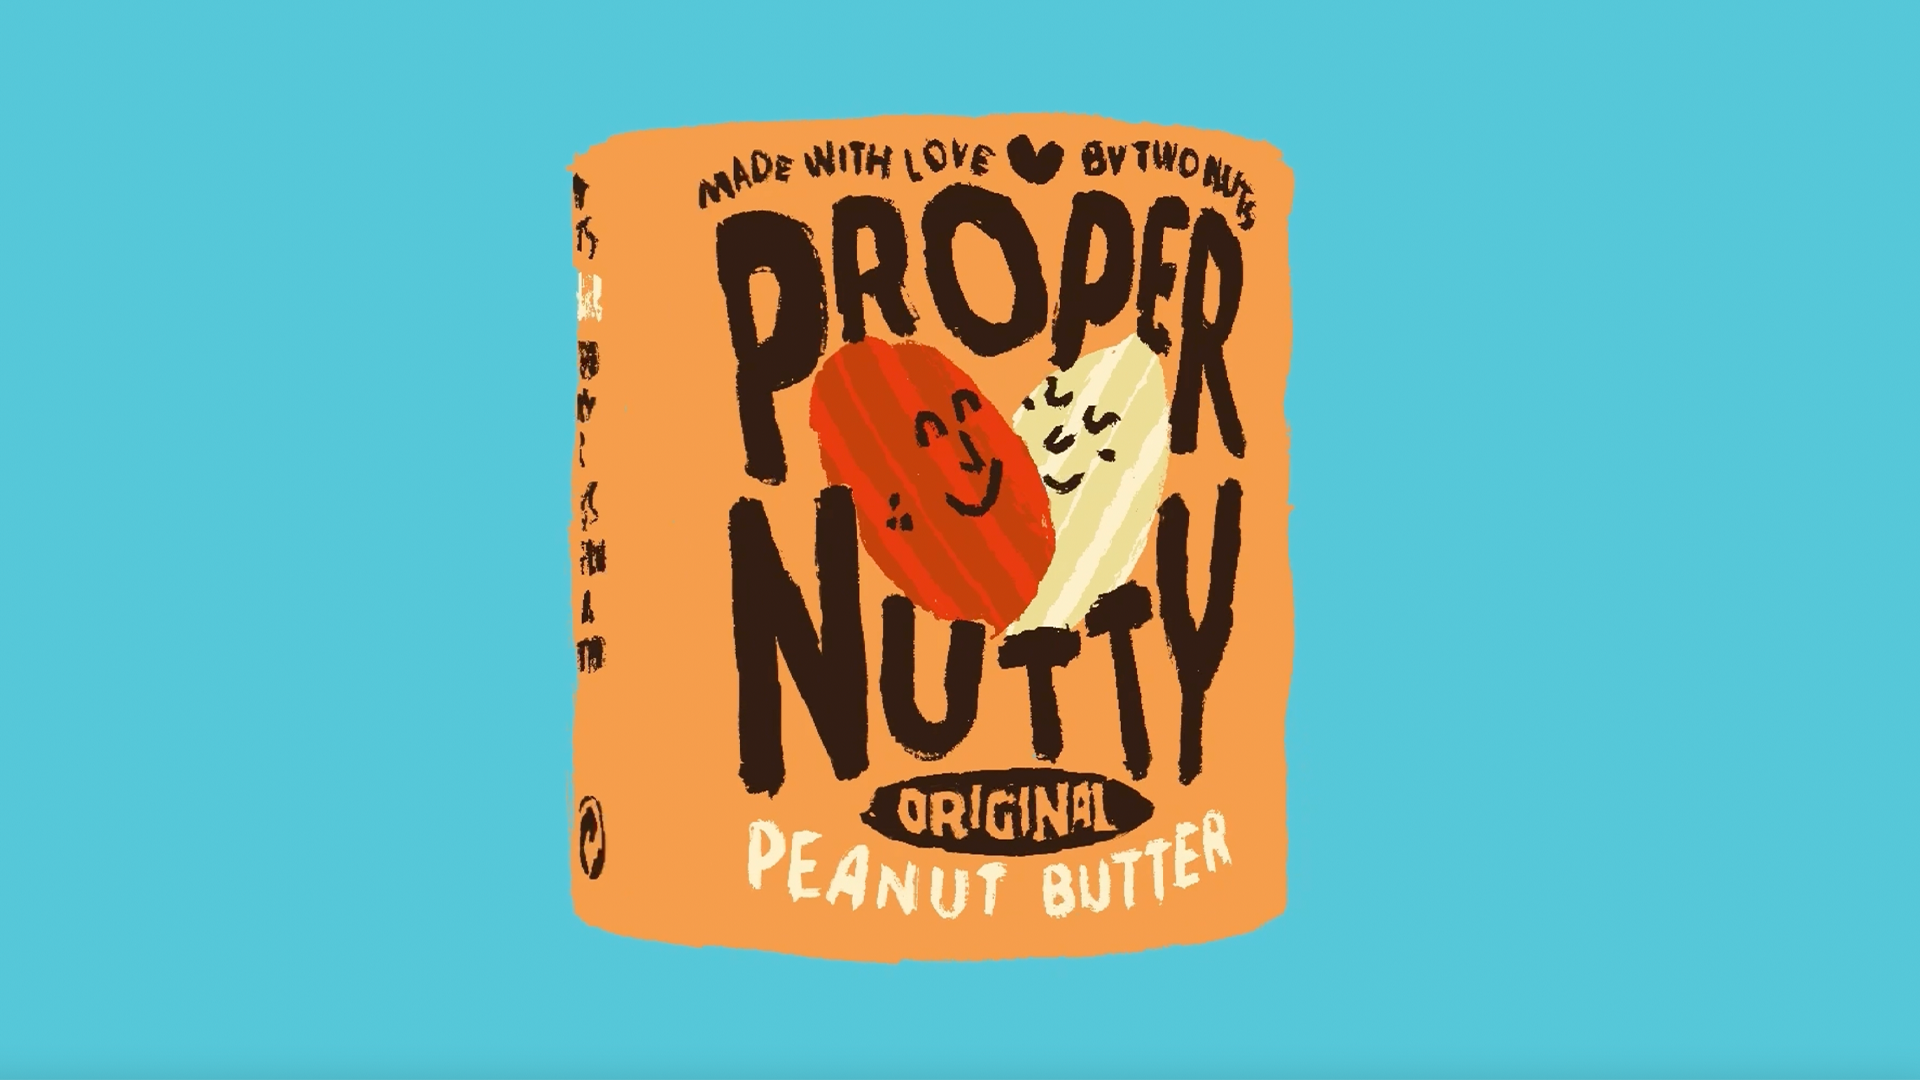 Video concept for Proper Nutty Peanut Butter by Eoin O'Kramer. Thumbnail has neutral coloured 'proper nutty' packaging design with text and peanutes on a blue background.